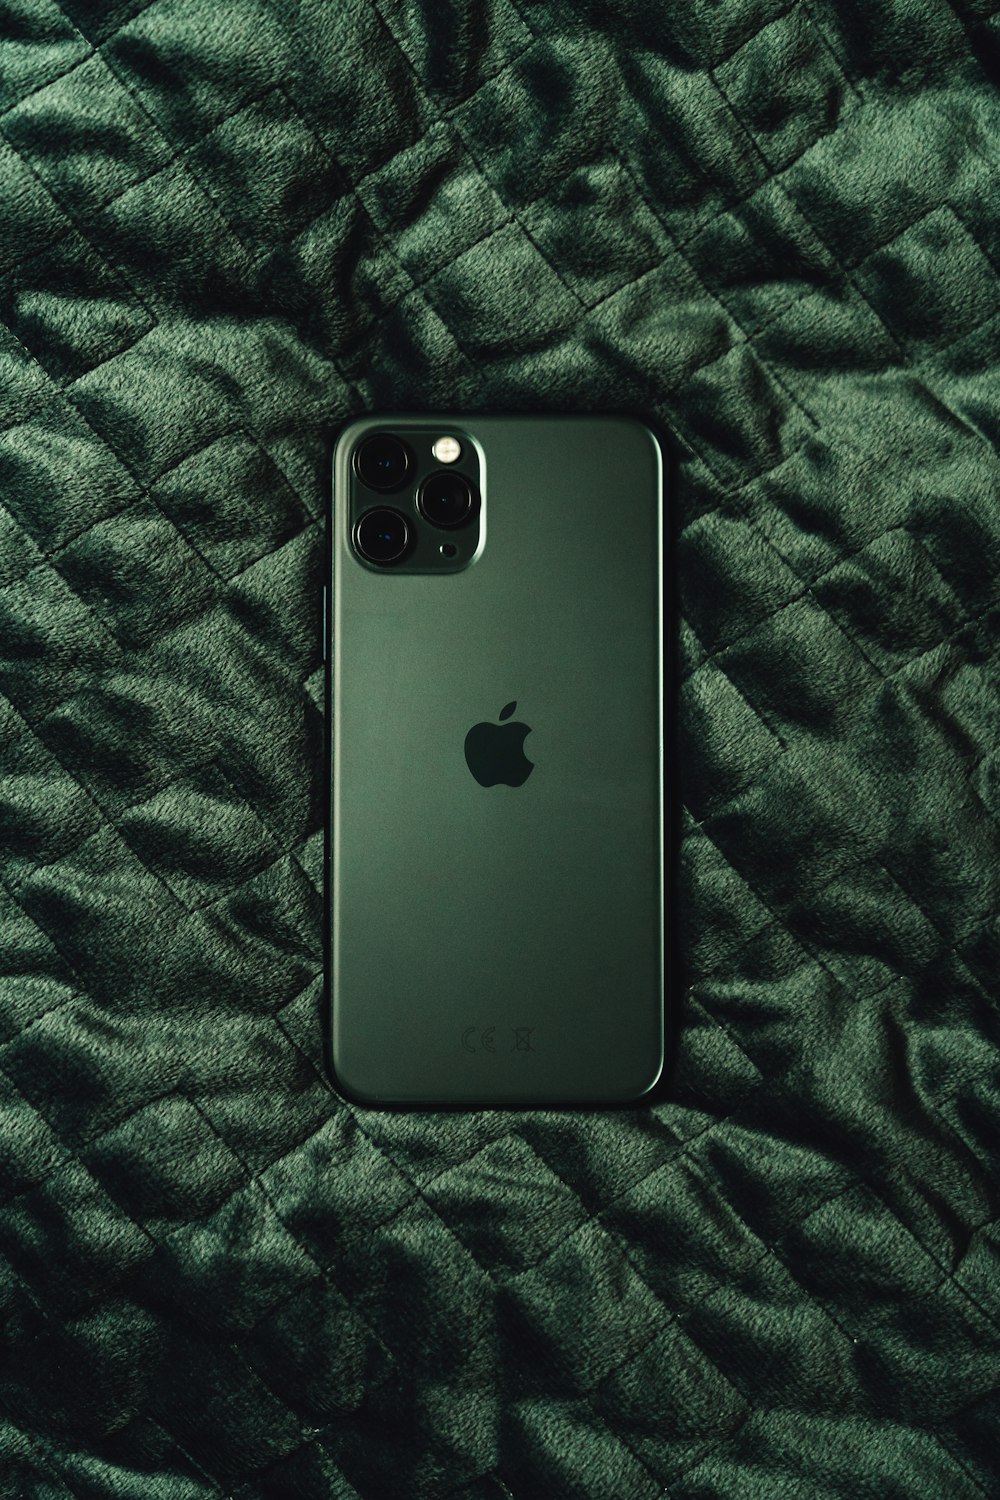 Iphone 11 Pro Max Pictures | Download Free Images on Unsplash